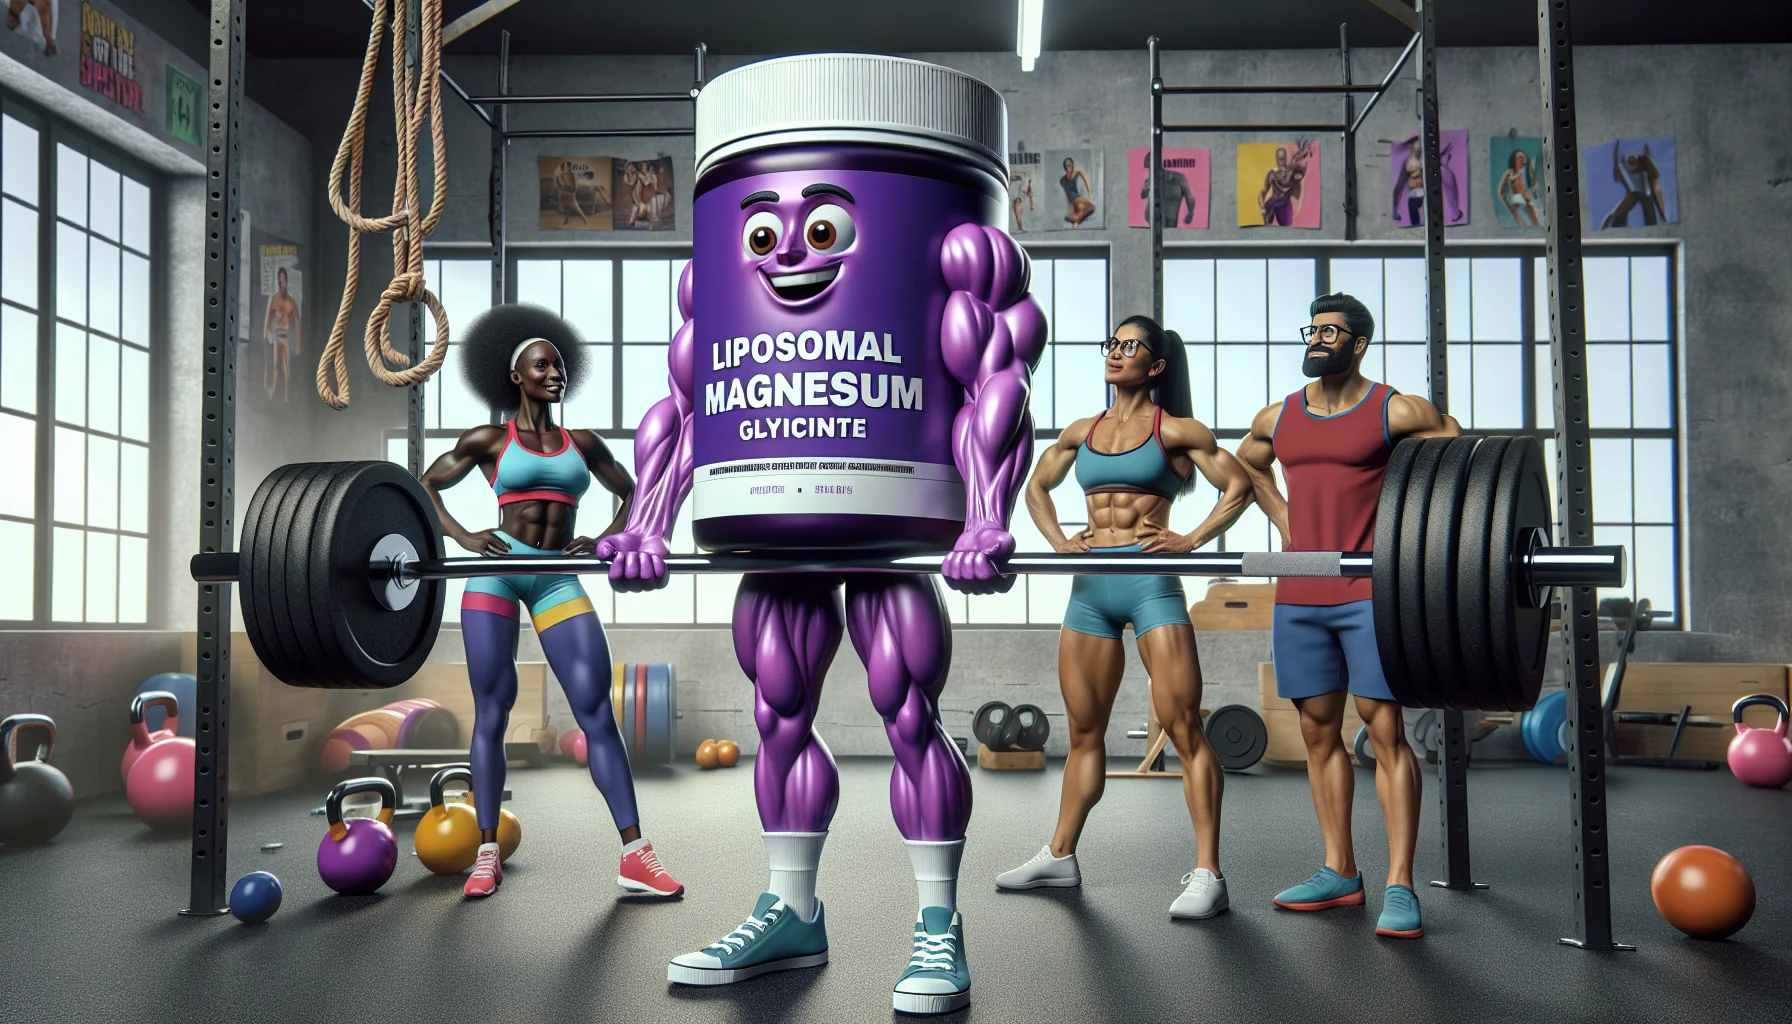 Generate a humorously inviting scene involving liposomal magnesium glycinate as a supplement for sports. Picture a purple container of the supplement, personified with a muscular physique and a charming smile, lifting a barbell effortlessly. To the side, a trio of fitness enthusiasts - a Black woman with a ponytail, a Hispanic man with a beard, and a South Asian woman wearing glasses - stand in awe. They're decked out in colorful athletic gear, in the middle of a gym environment with various exercise equipment around them. The walls are adorned with posters encouraging health and strength.